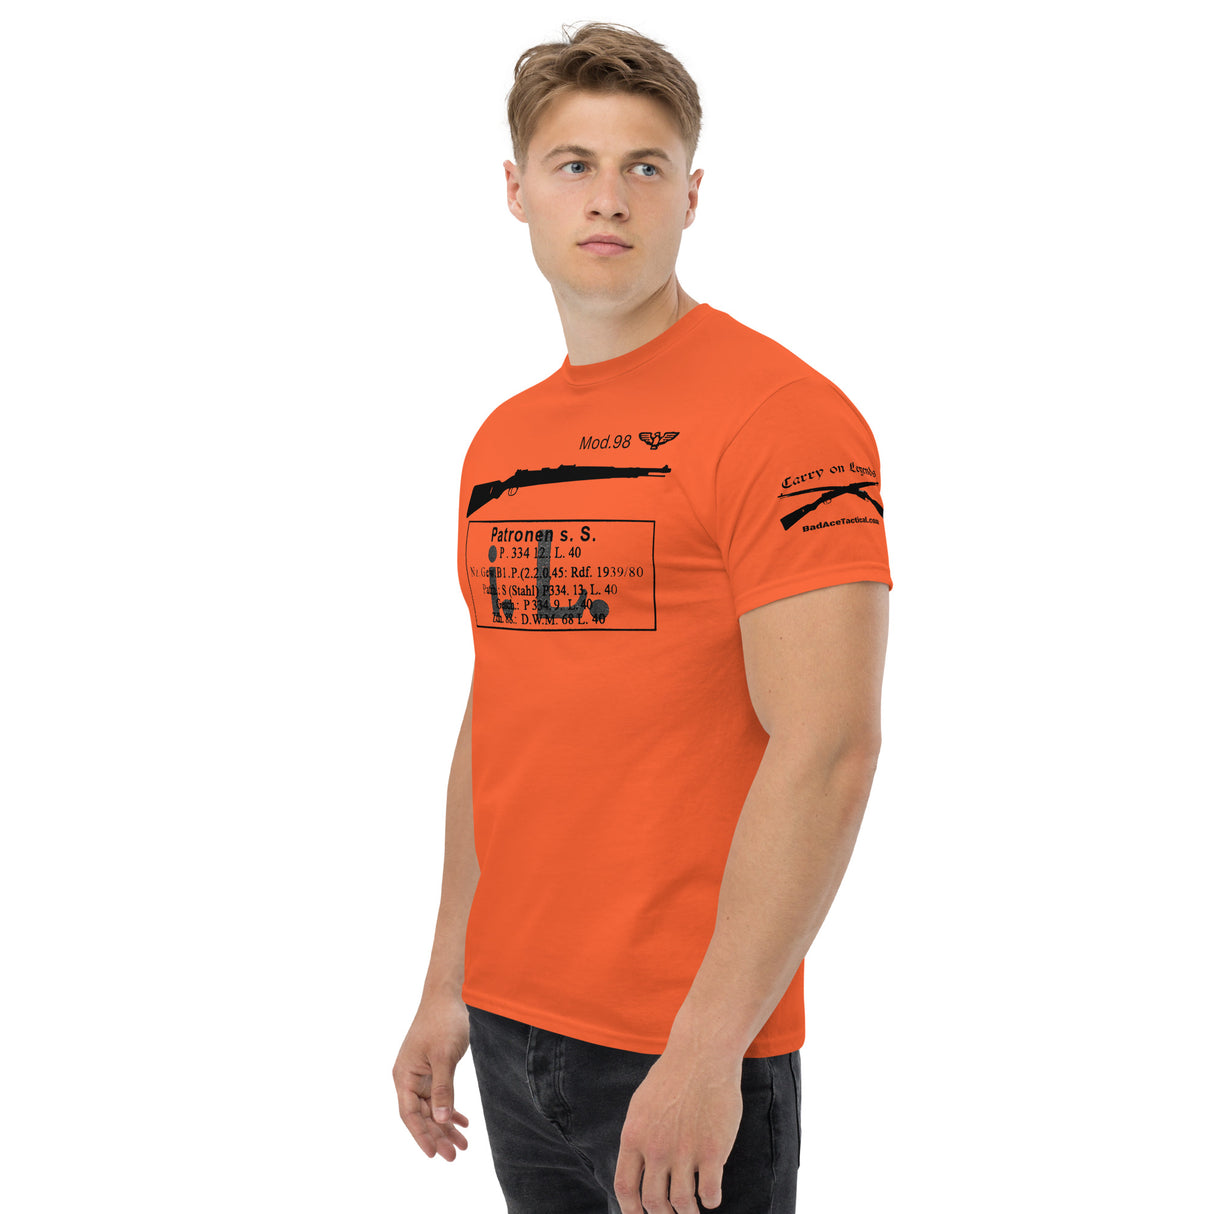 Mauser K98k Karabiner 98 kurz cotton T-shirt with receiver stamps and ammo pack labels - dark font